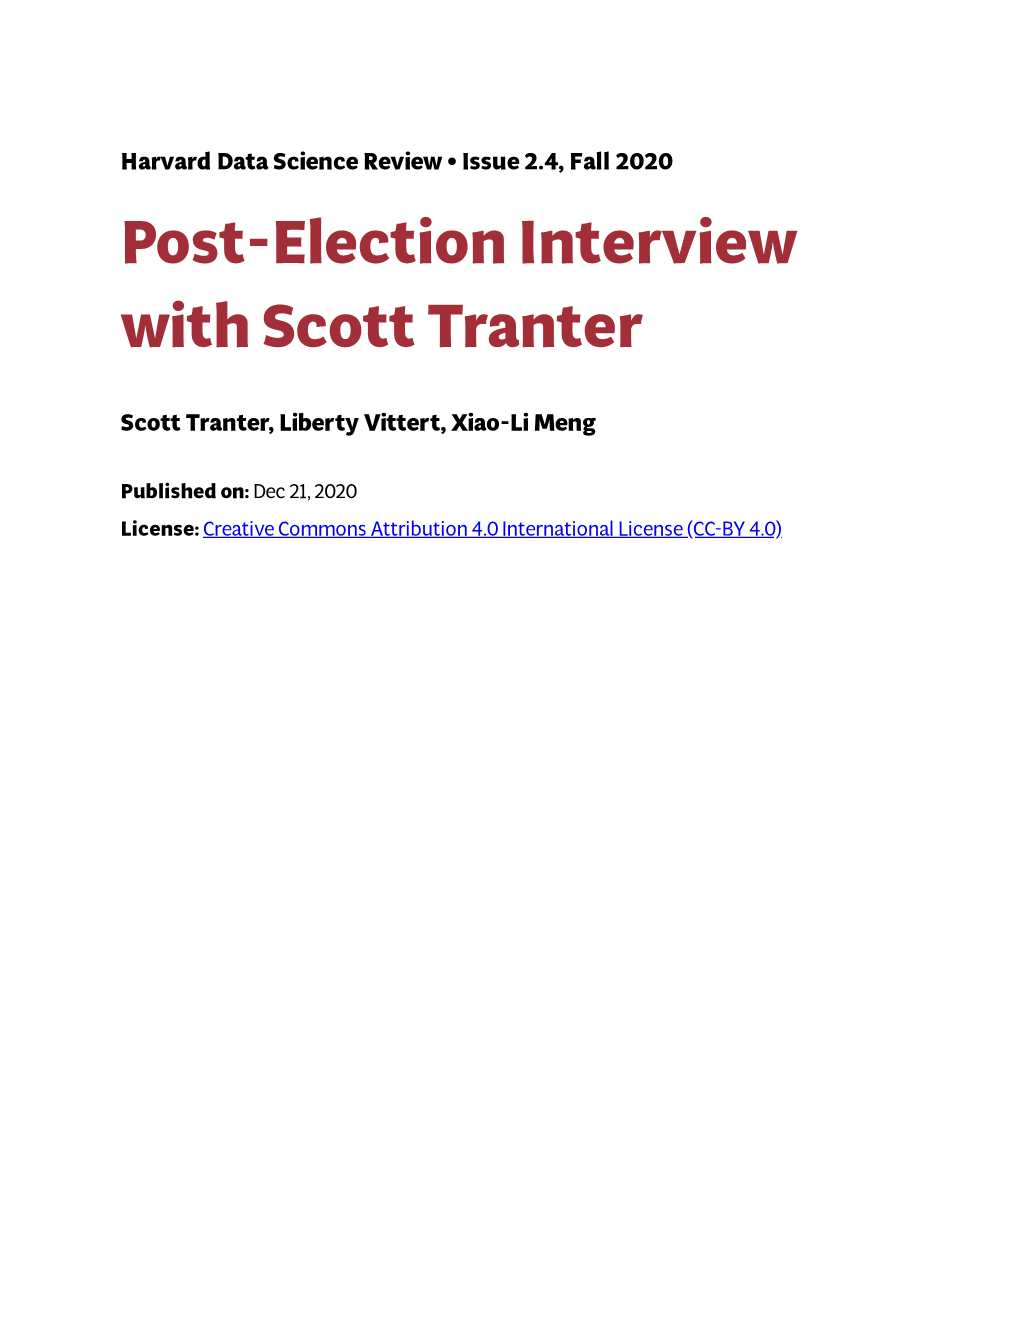 Post-Election Interview with Scott Tranter